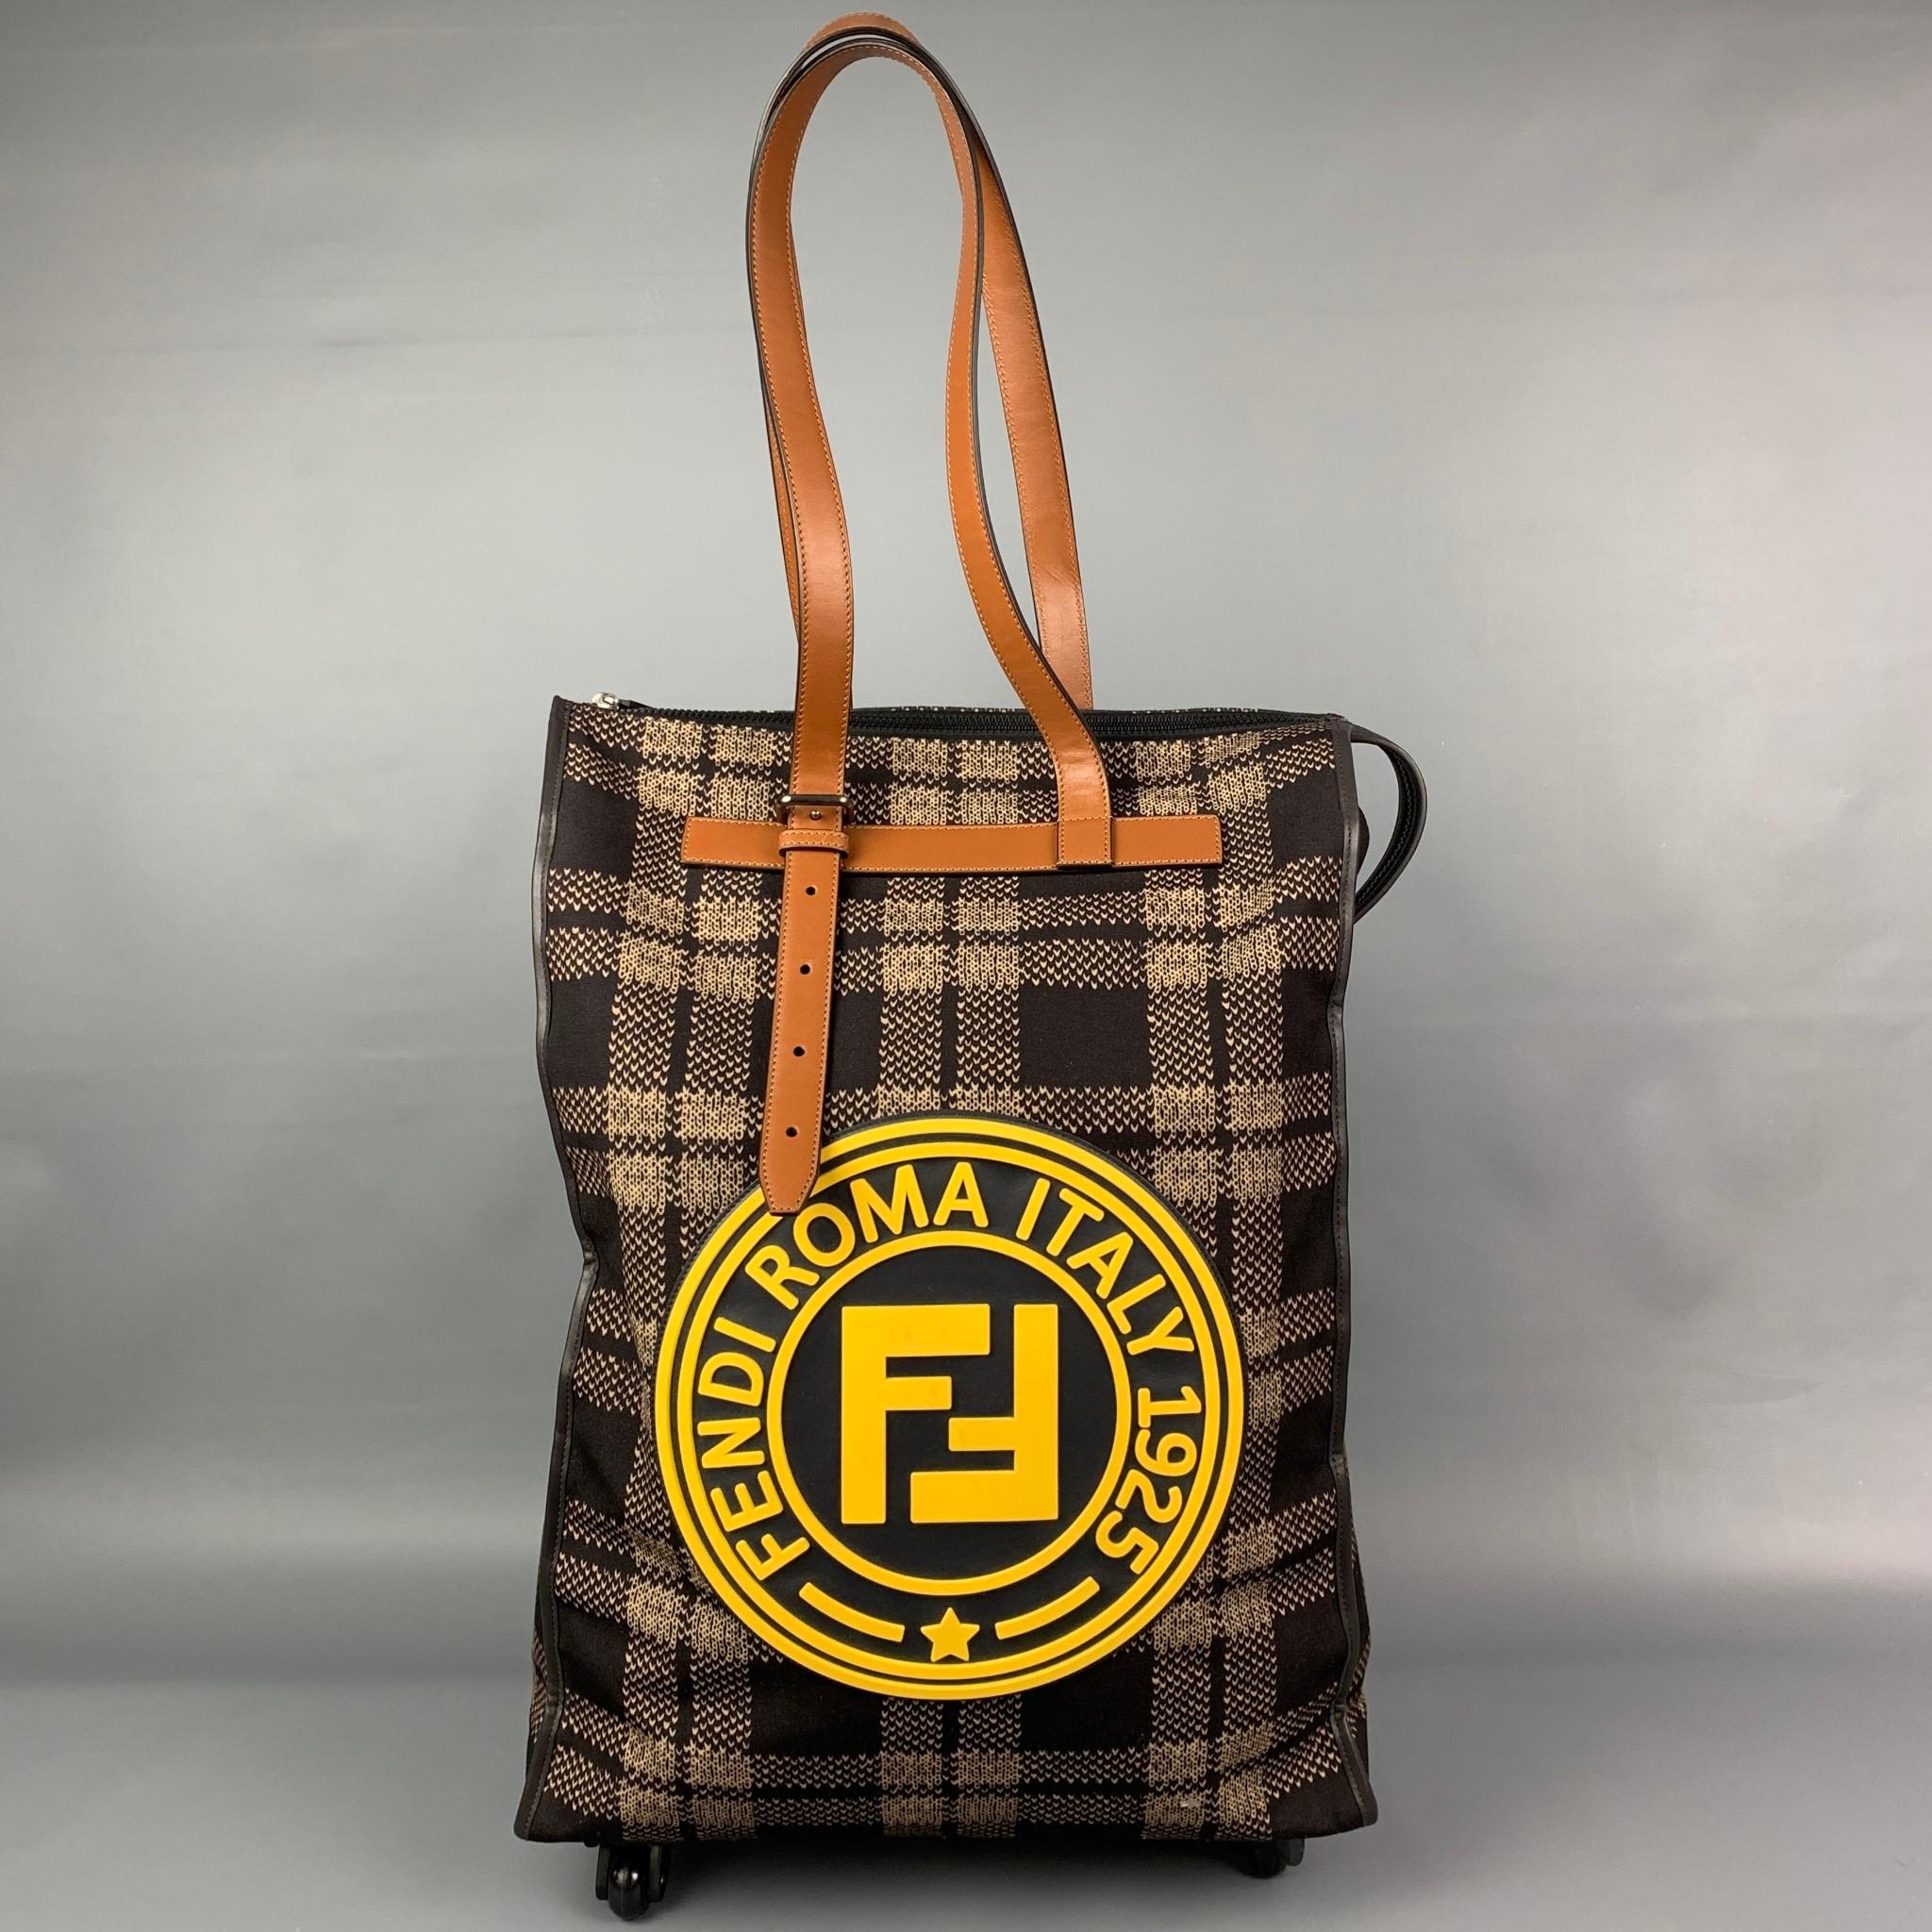 FENDI roller bag comes in a brown & beige plaid canvas featuring brown leather top handles, bottom wheels, front yellow rubber logo design, leather trim, and a top zip up closure. Made in Italy.

Excellent Pre-Owned